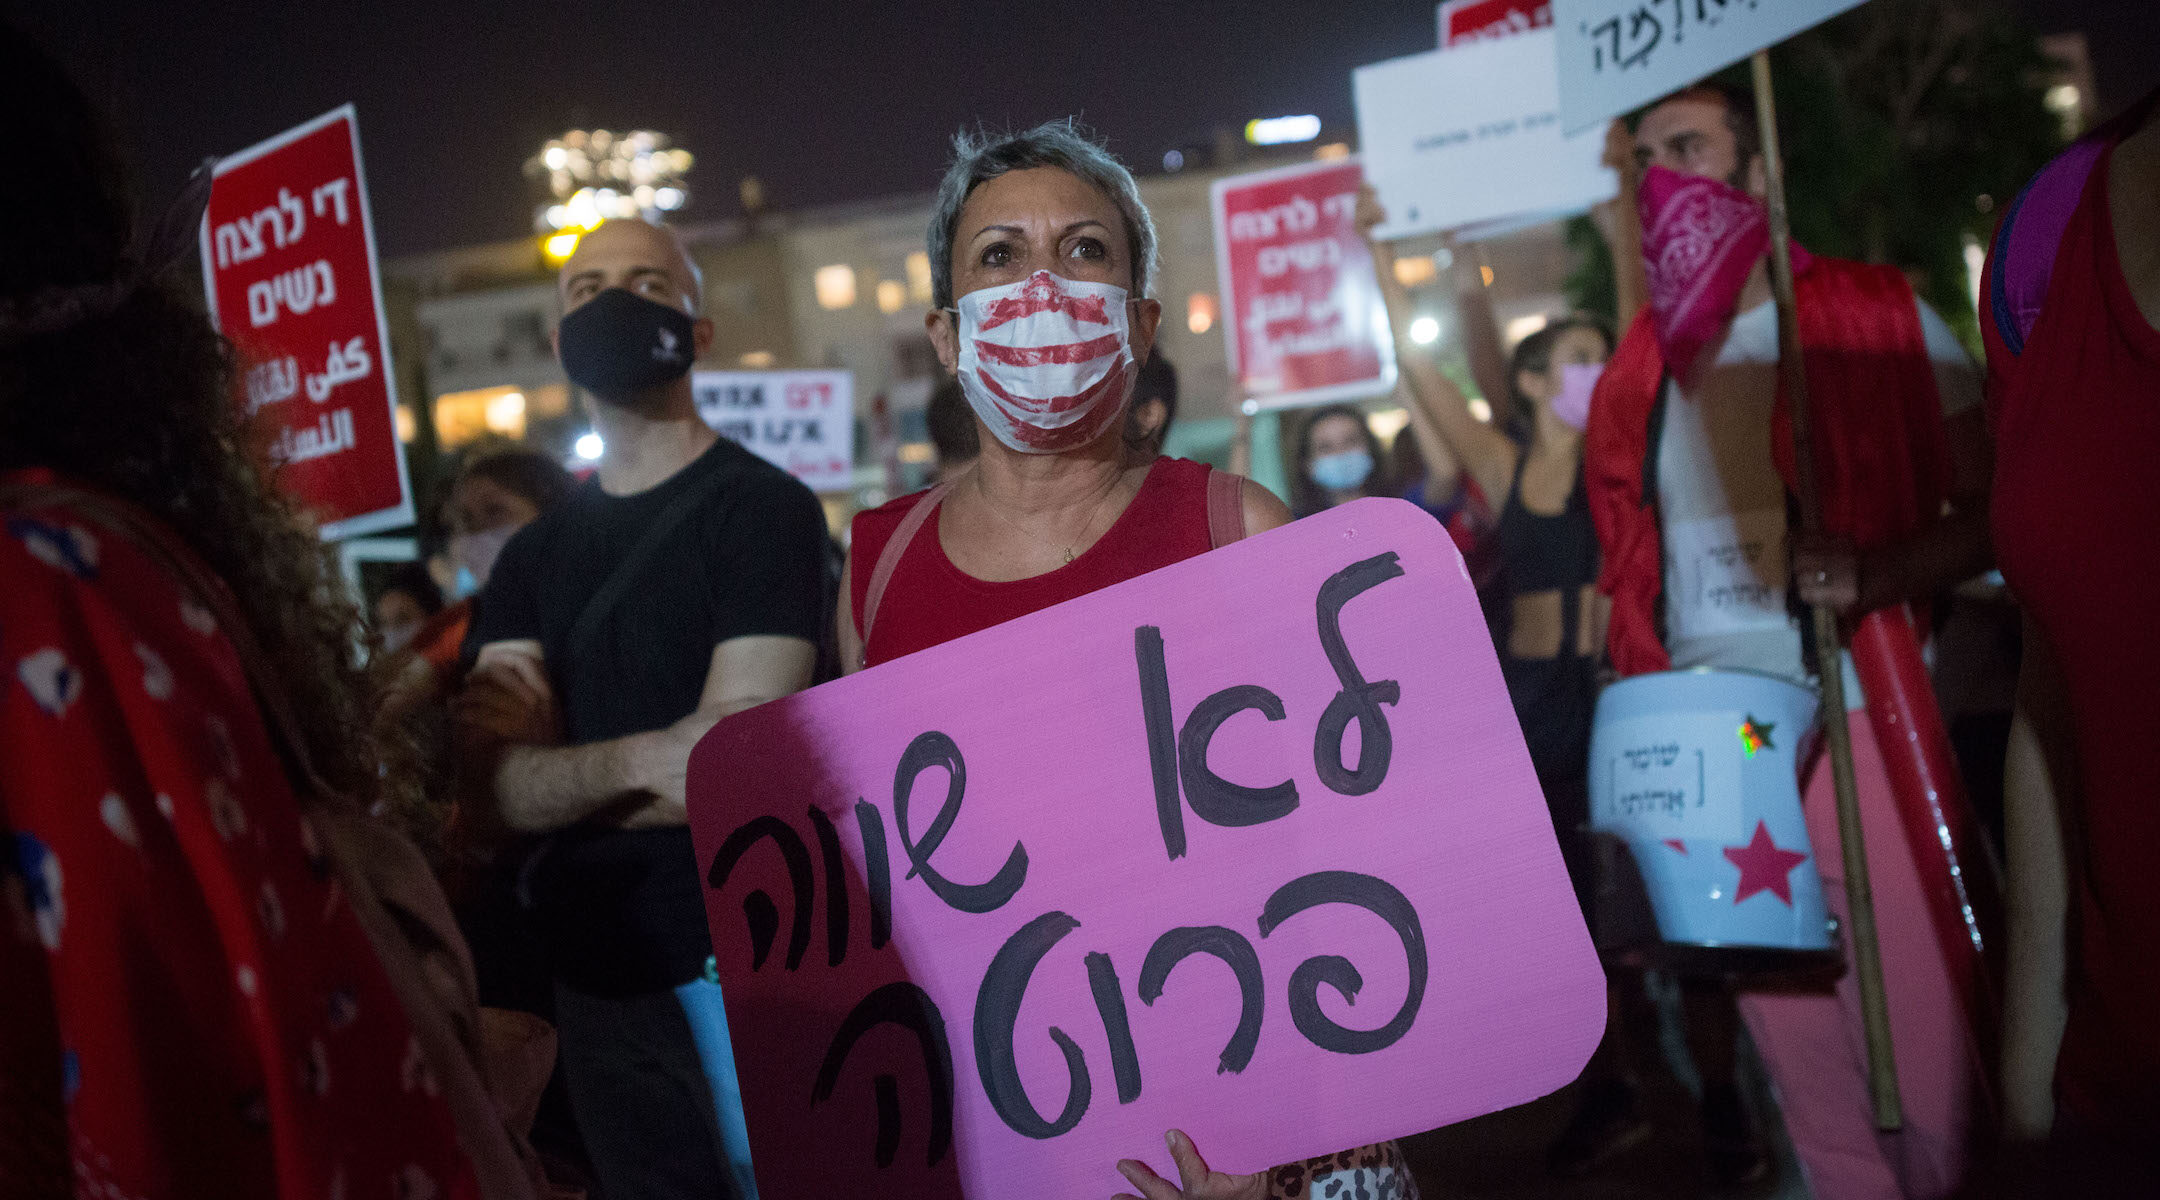 Activists protest violence against women at Habima square in Tel Aviv on October 21, 2020. (Miriam Alster/Flash90)